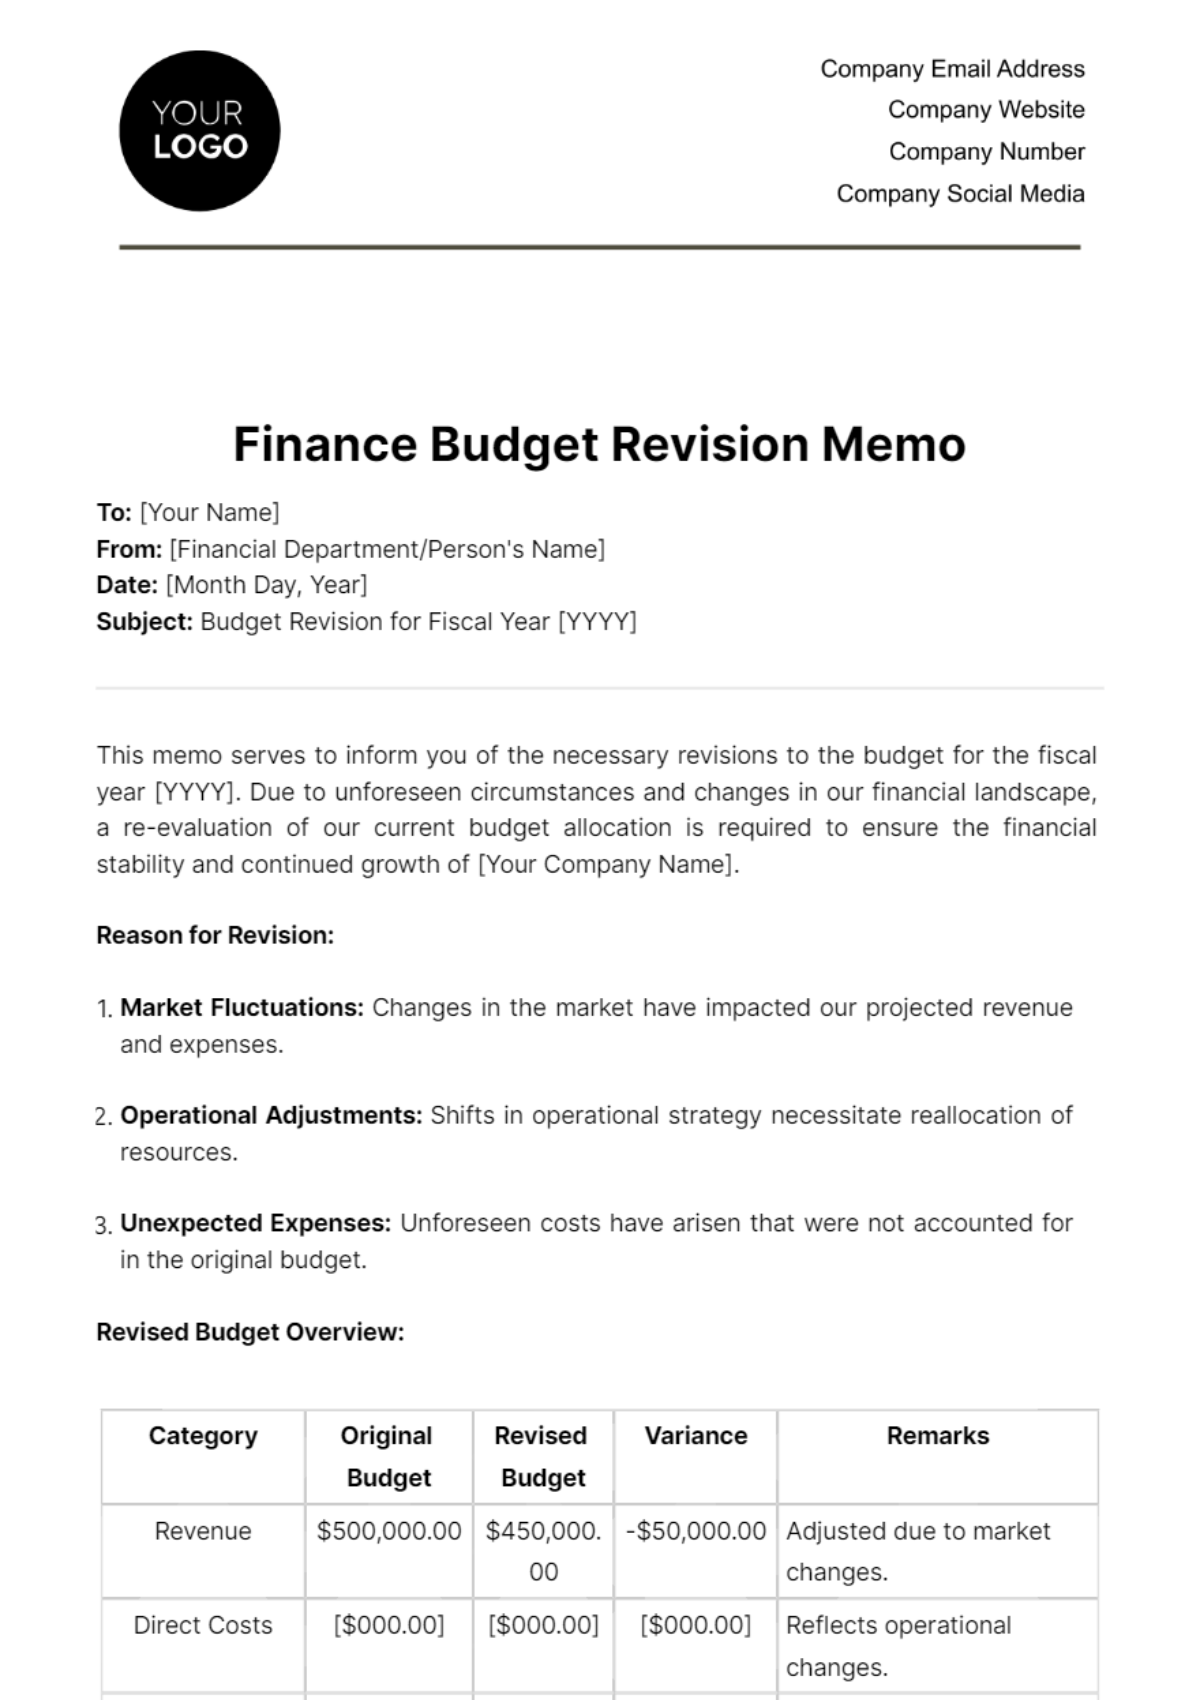 Finance Budget Revision Memo Template